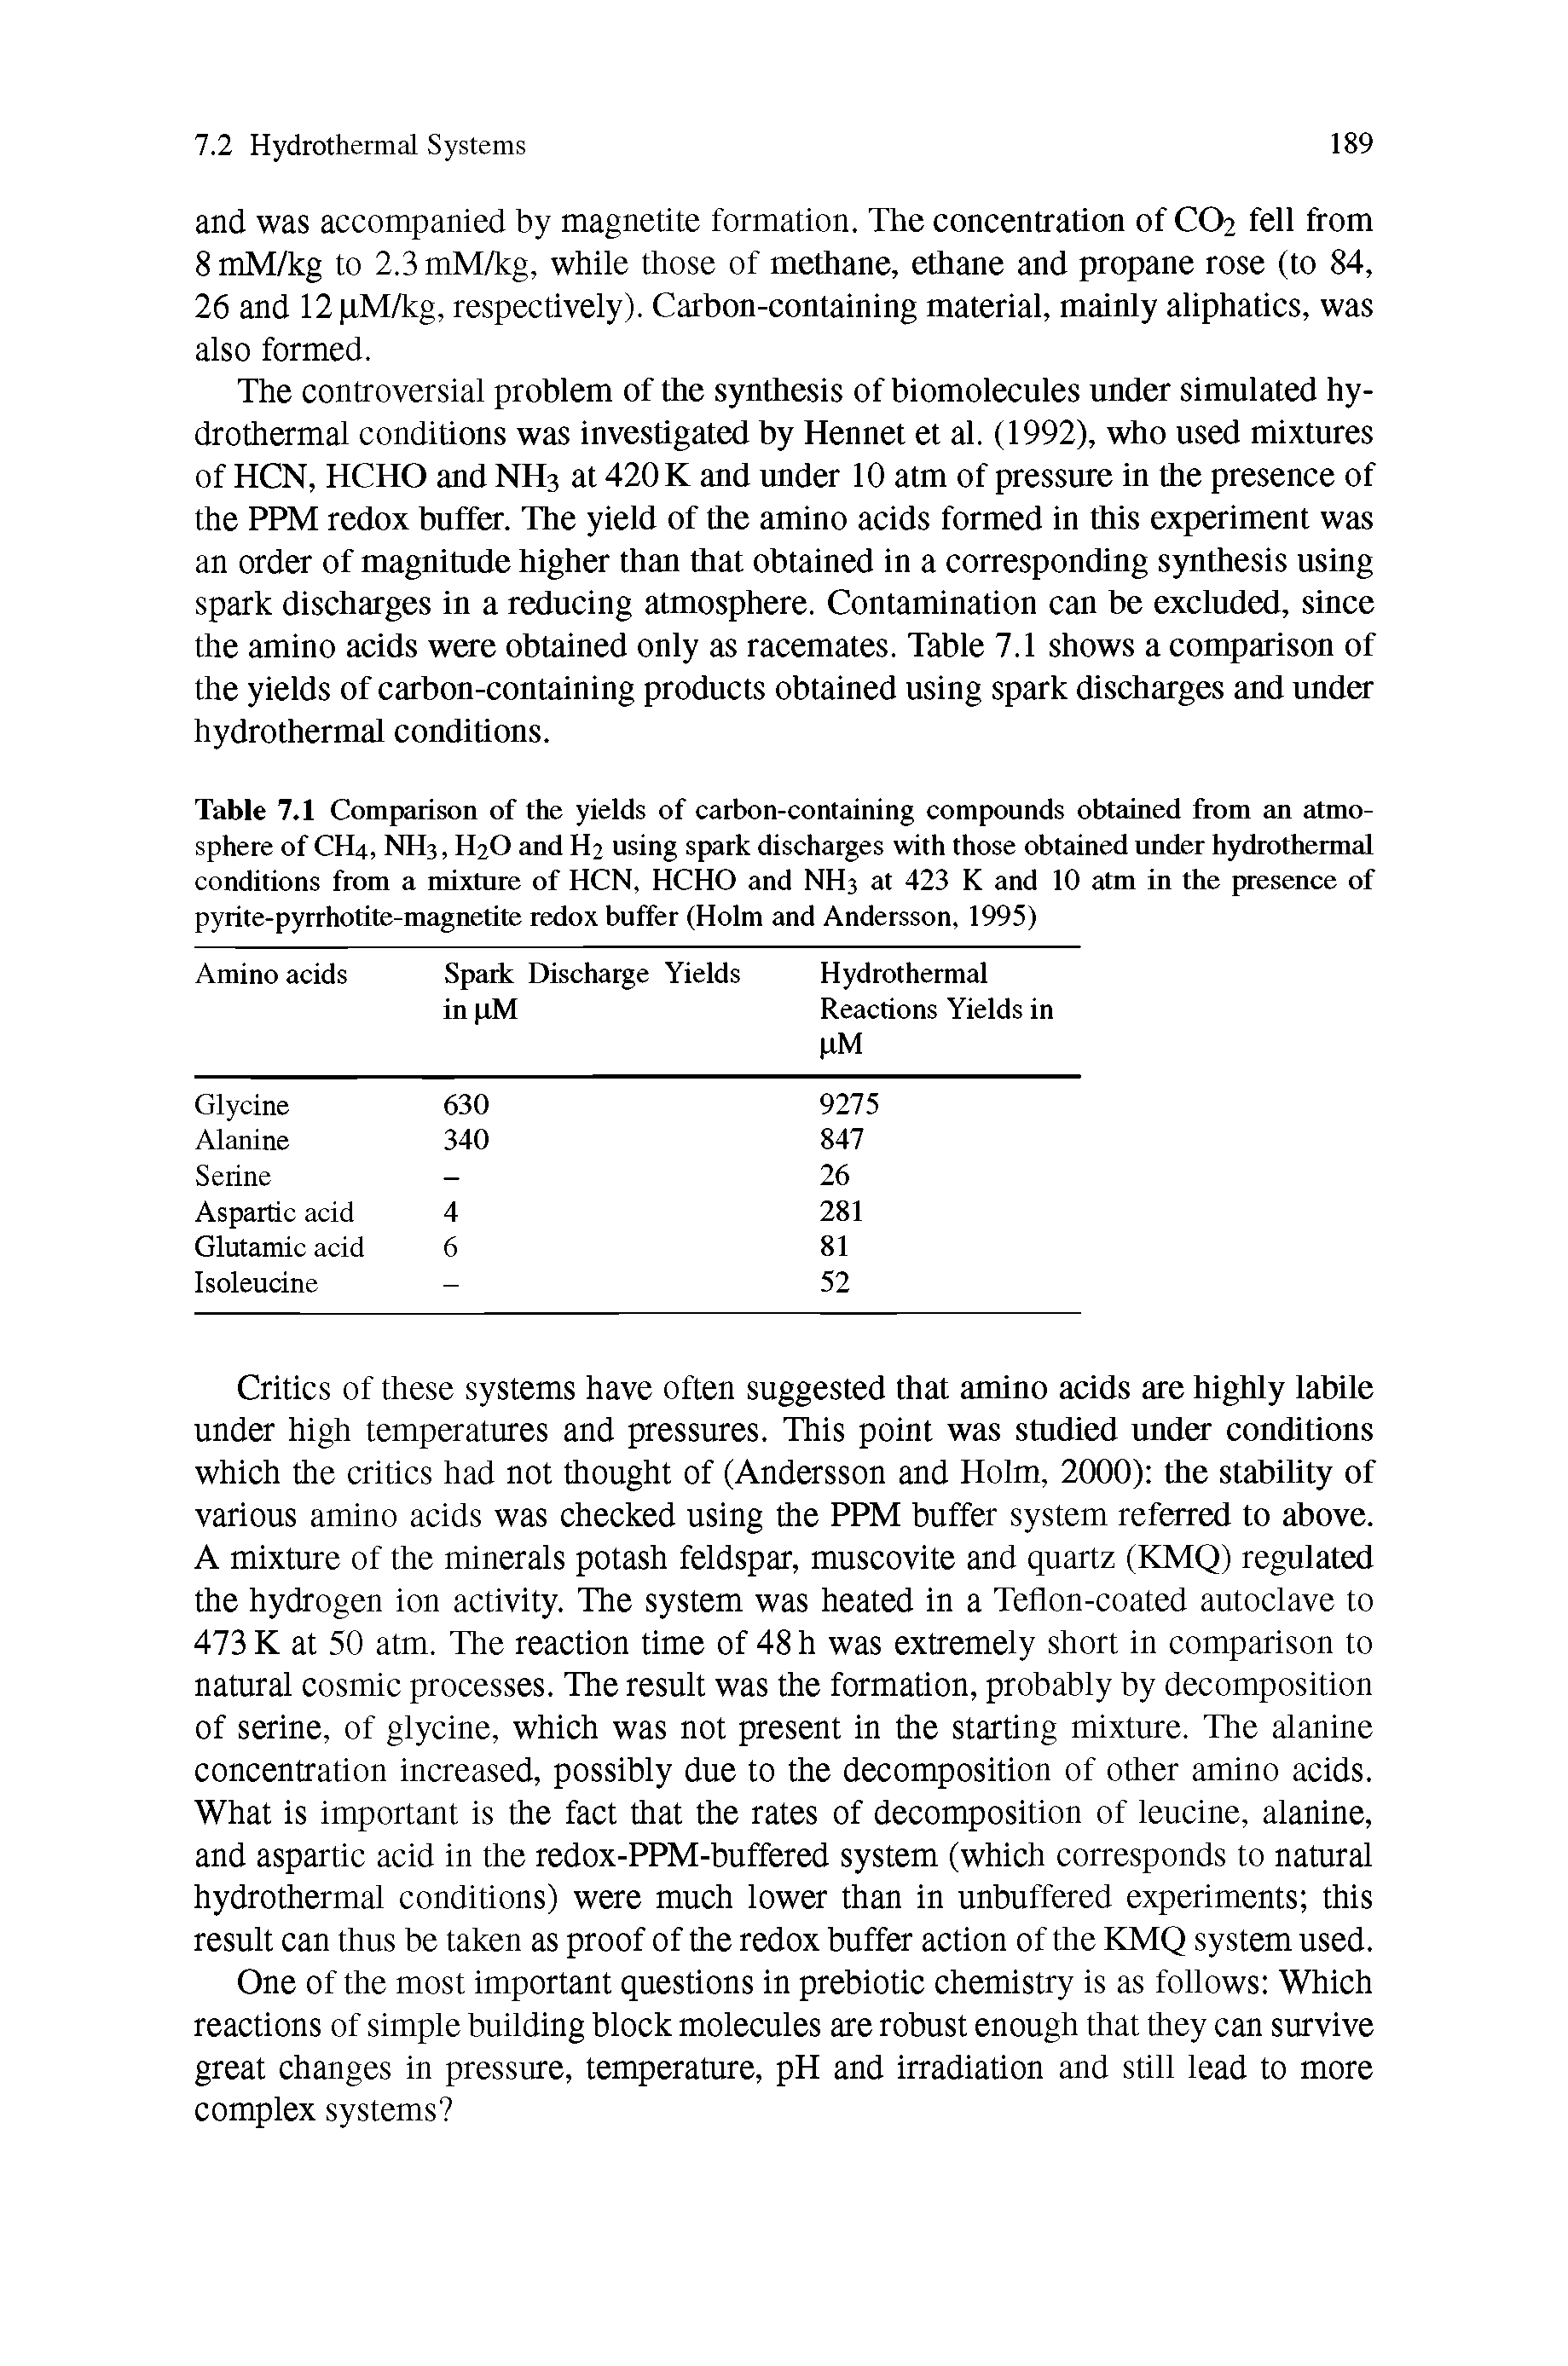 Table 7.1 Comparison of the yields of carbon-containing compounds obtained from an atmosphere of CH4, NH3, H2O and H2 using spark discharges with those obtained under hydrothermal conditions from a mixture of HCN, HCHO and NH3 at 423 K and 10 atm in the presence of pyrite-pyrrhotite-magnetite redox buffer (Holm and Andersson, 1995)...